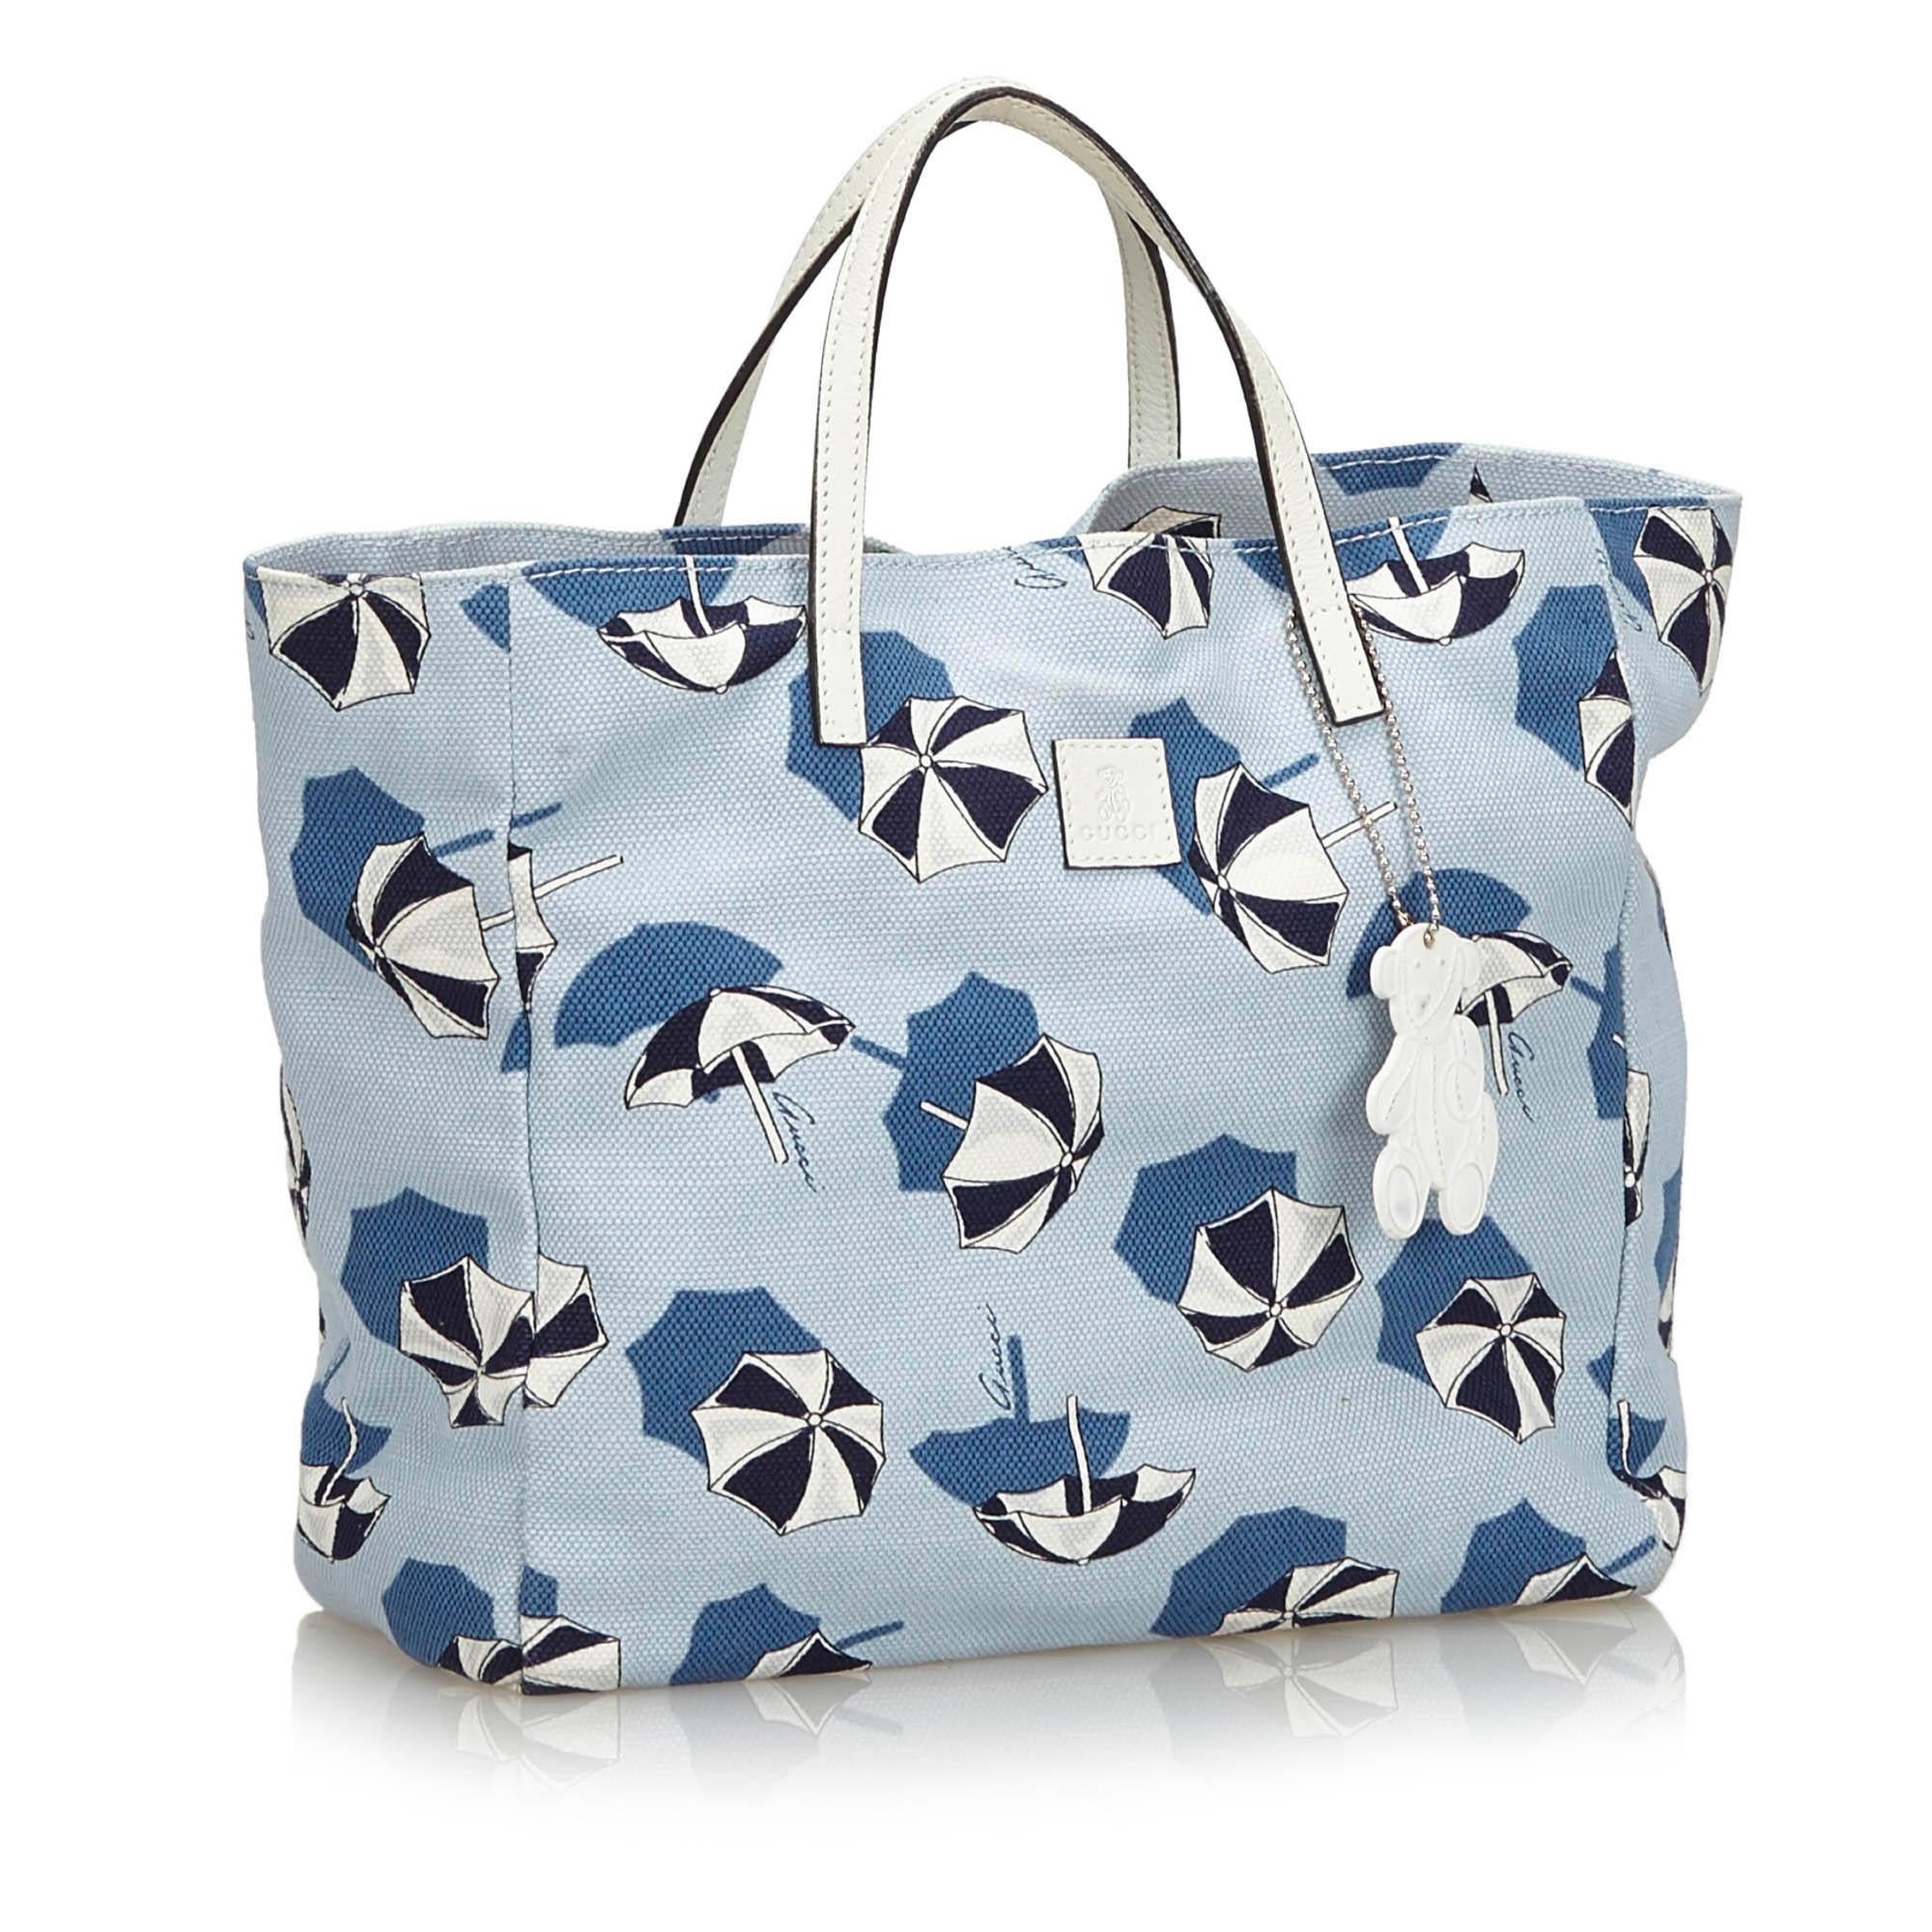 This tote bag features a printed canvas body with leather trim, flat leather straps, an open top, and an interior slip pocket. It carries as B+ condition rating.

Inclusions: 
Dust Bag

Dimensions:
Length: 21.00 cm
Width: 24.00 cm
Depth: 10.00